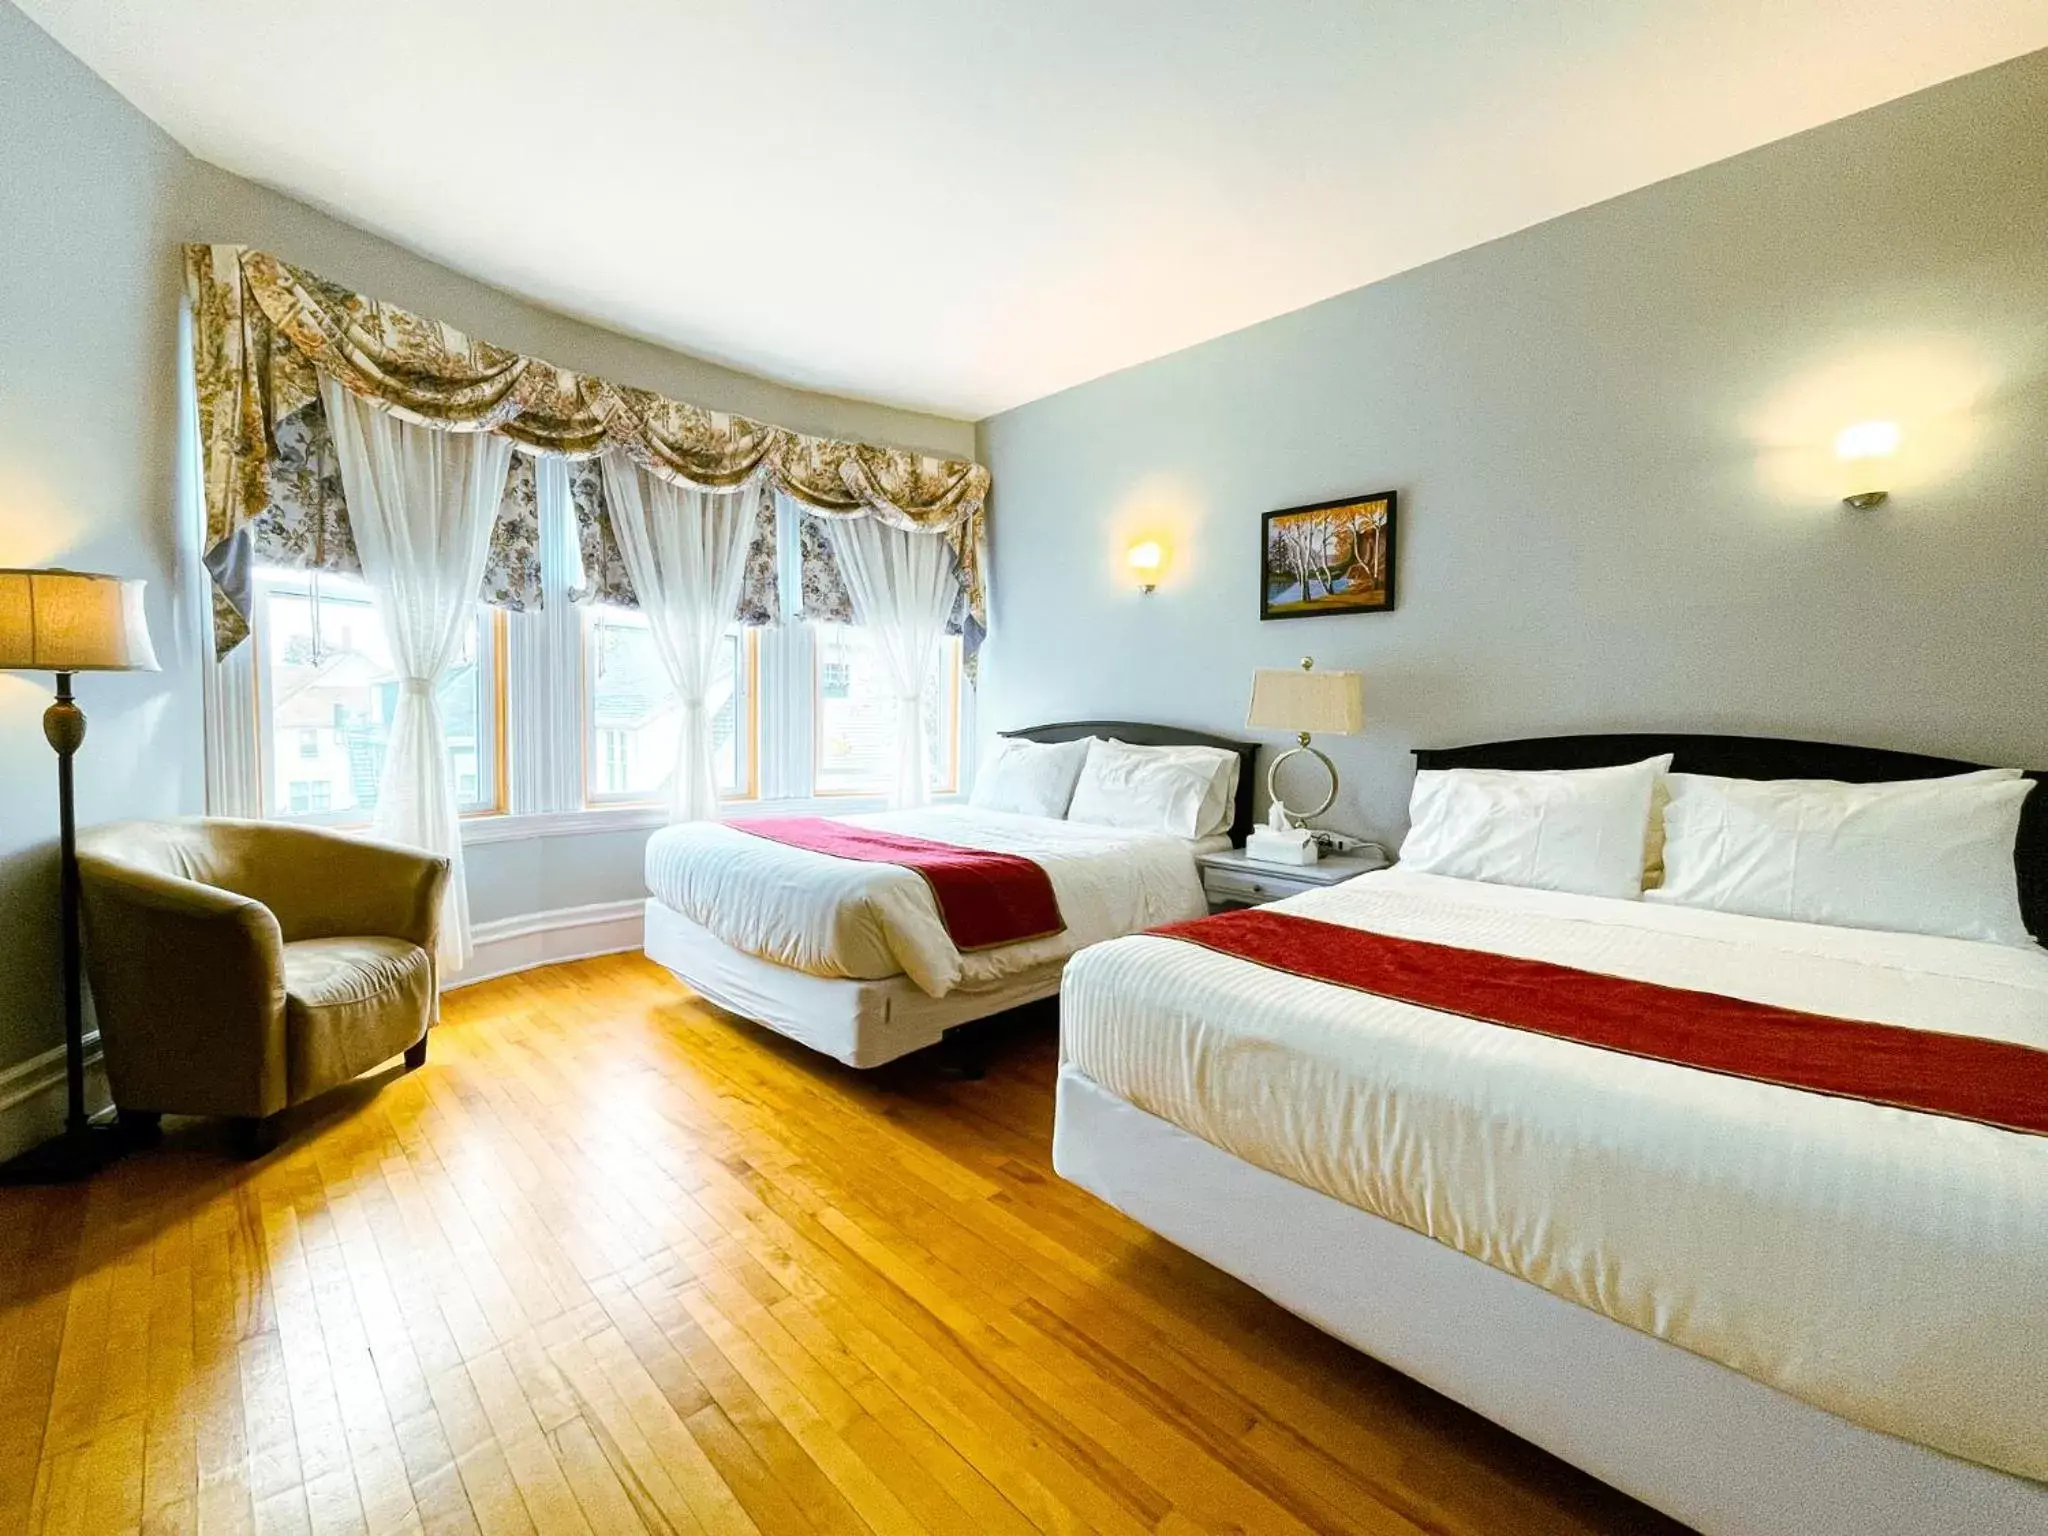 Standard Queen Room with Two Queen Beds - single occupancy in The Eden Hall Inn